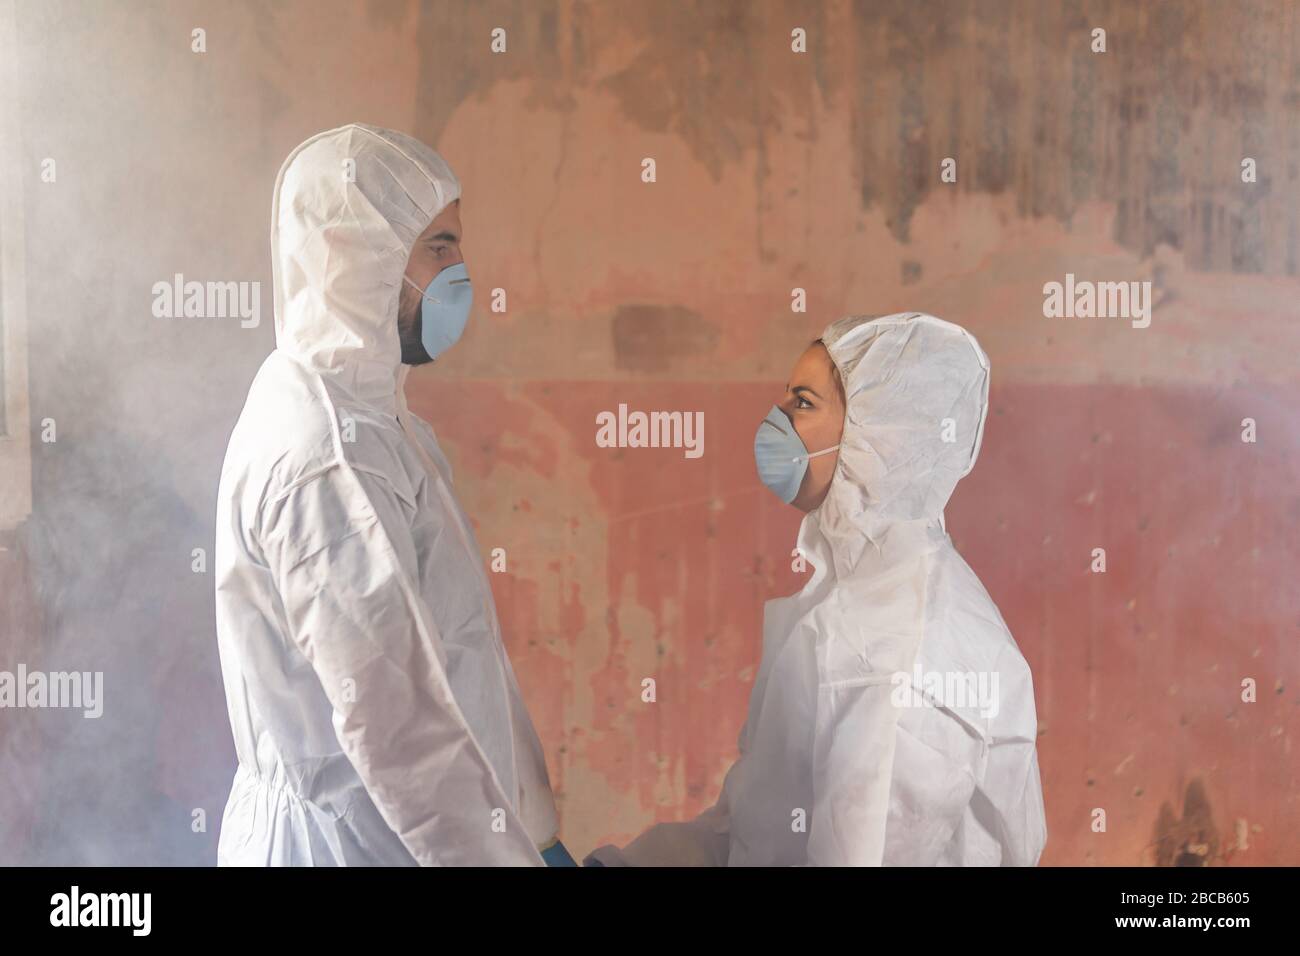 Couple of virologist doctors and scientists wearing biohazard protective suits and holding hands full of hope after a nuclear core meltdown disaster Stock Photo